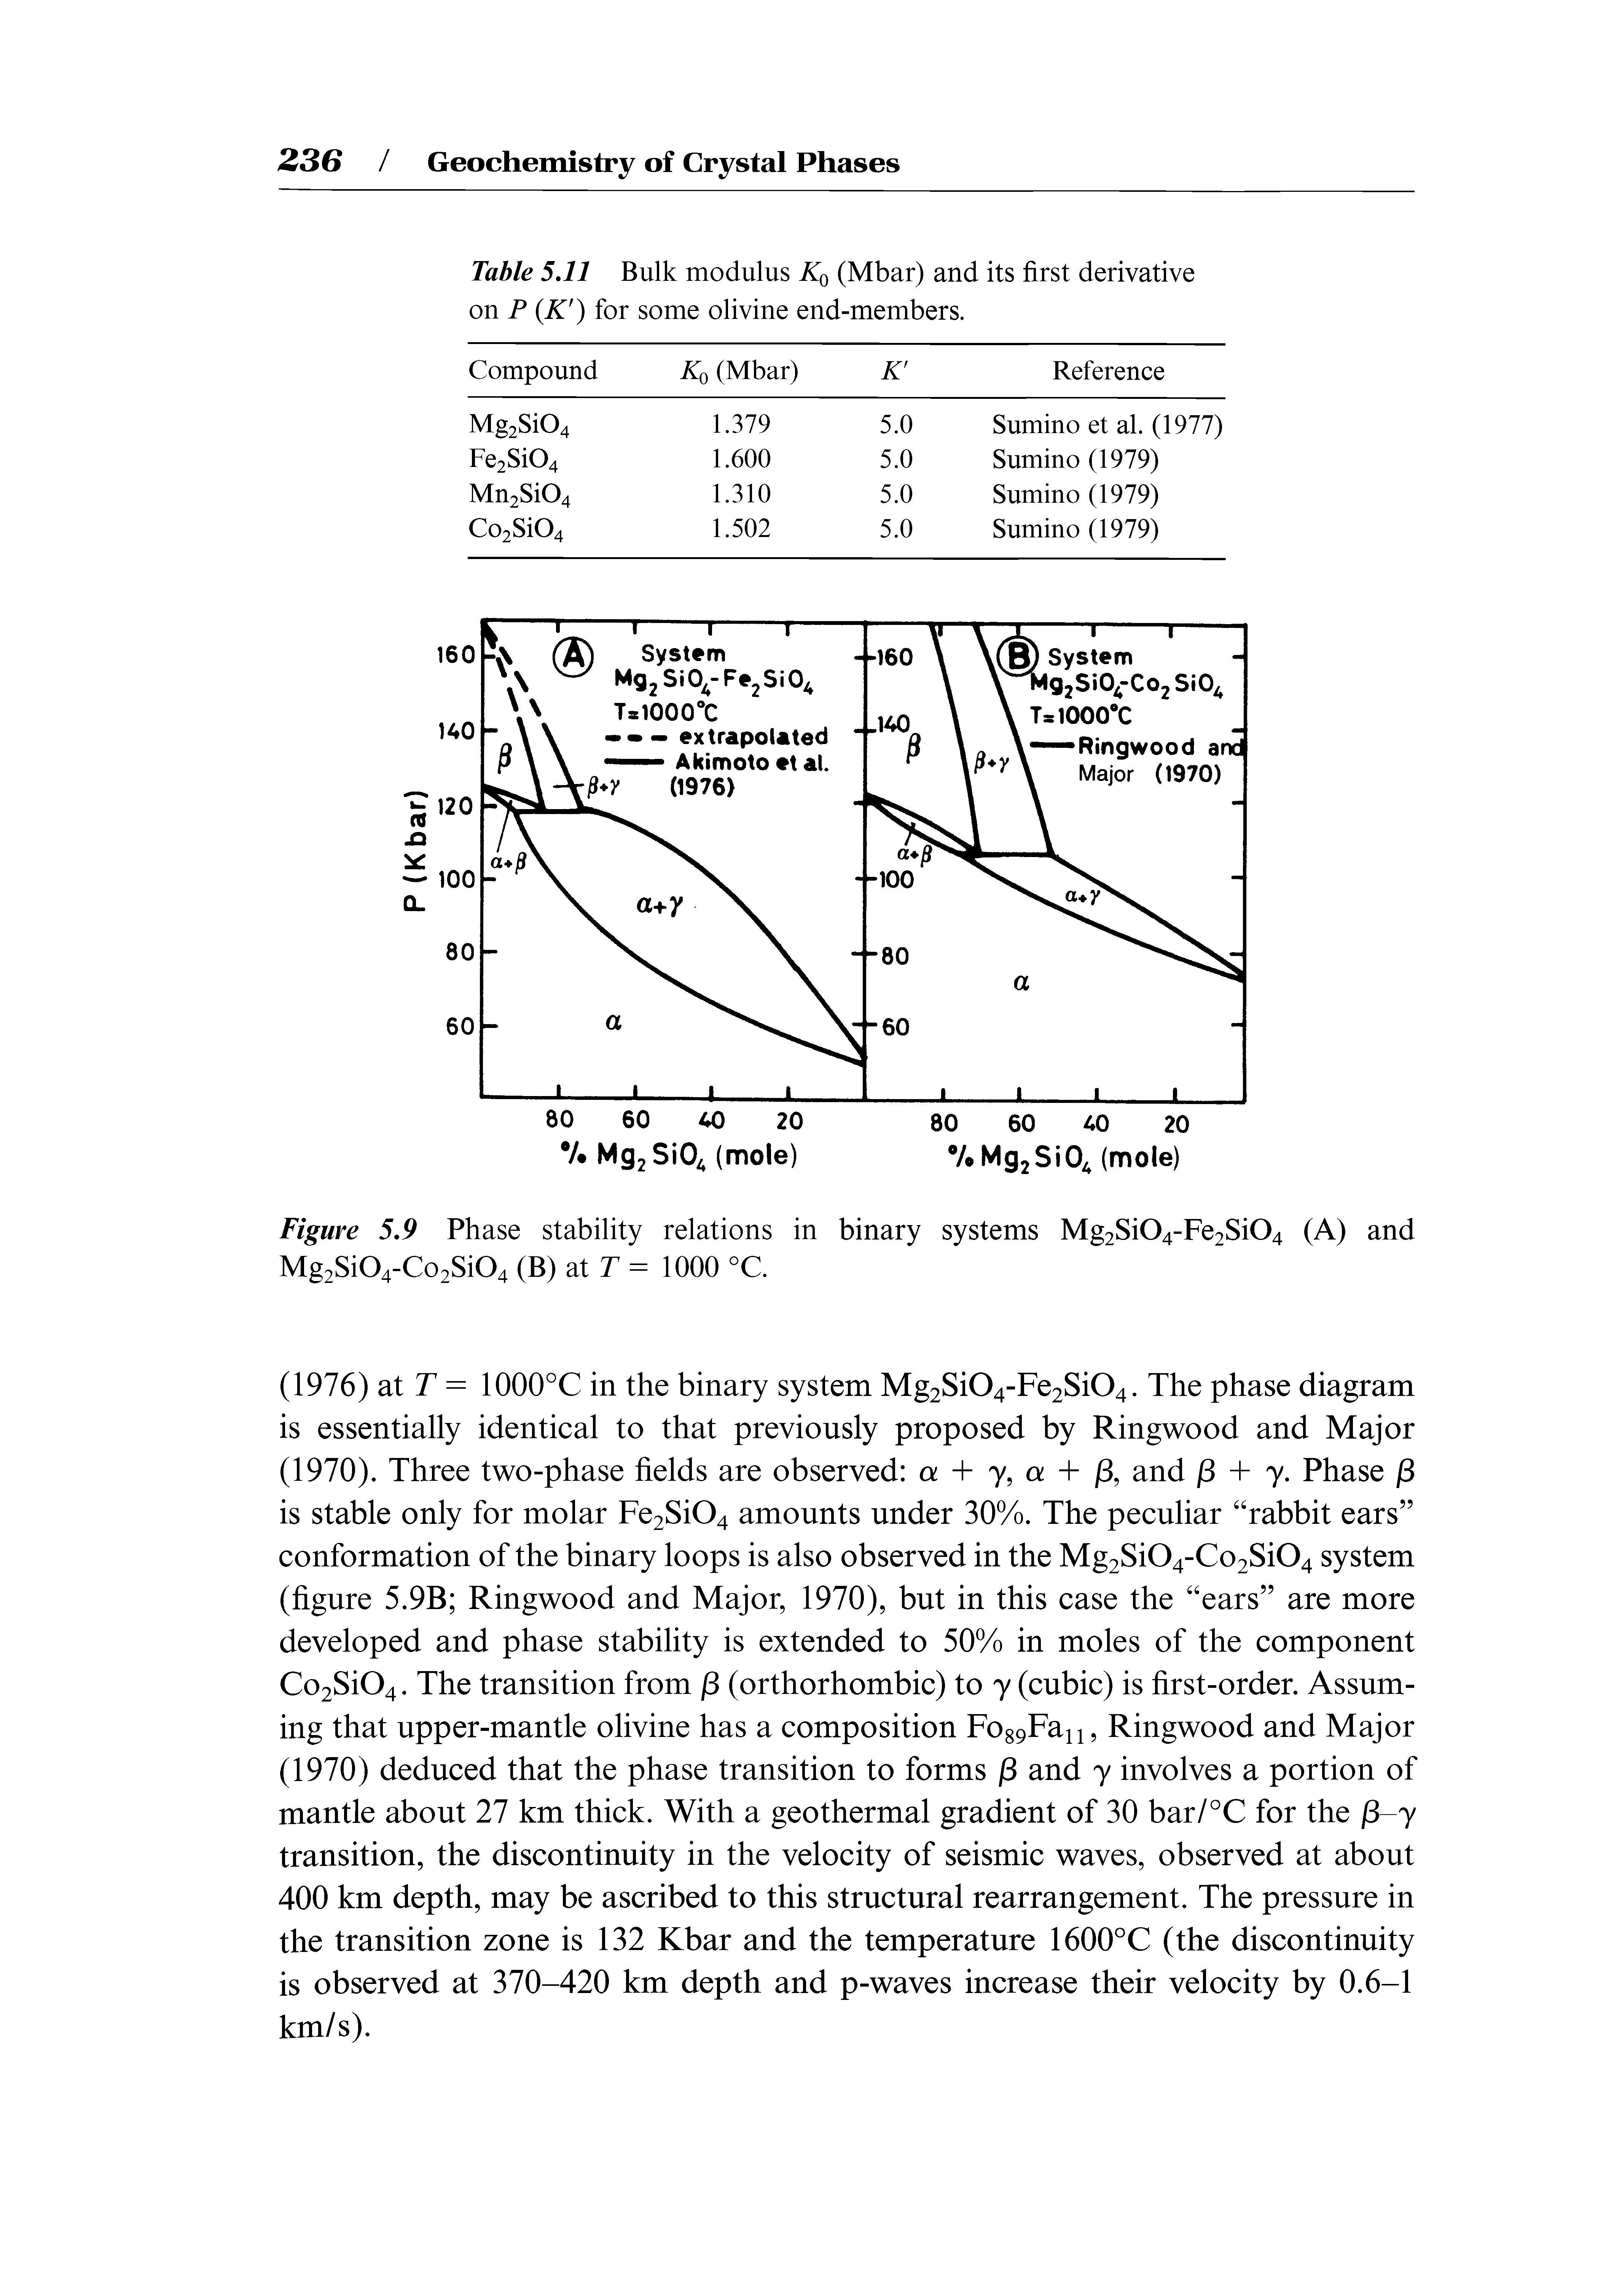 Figure 5,9 Phase stability relations in binary systems Mg2Si04-Fe2Si04 (A) and Mg2Si04-Co2Si04 (B) at T = 1000 °C.